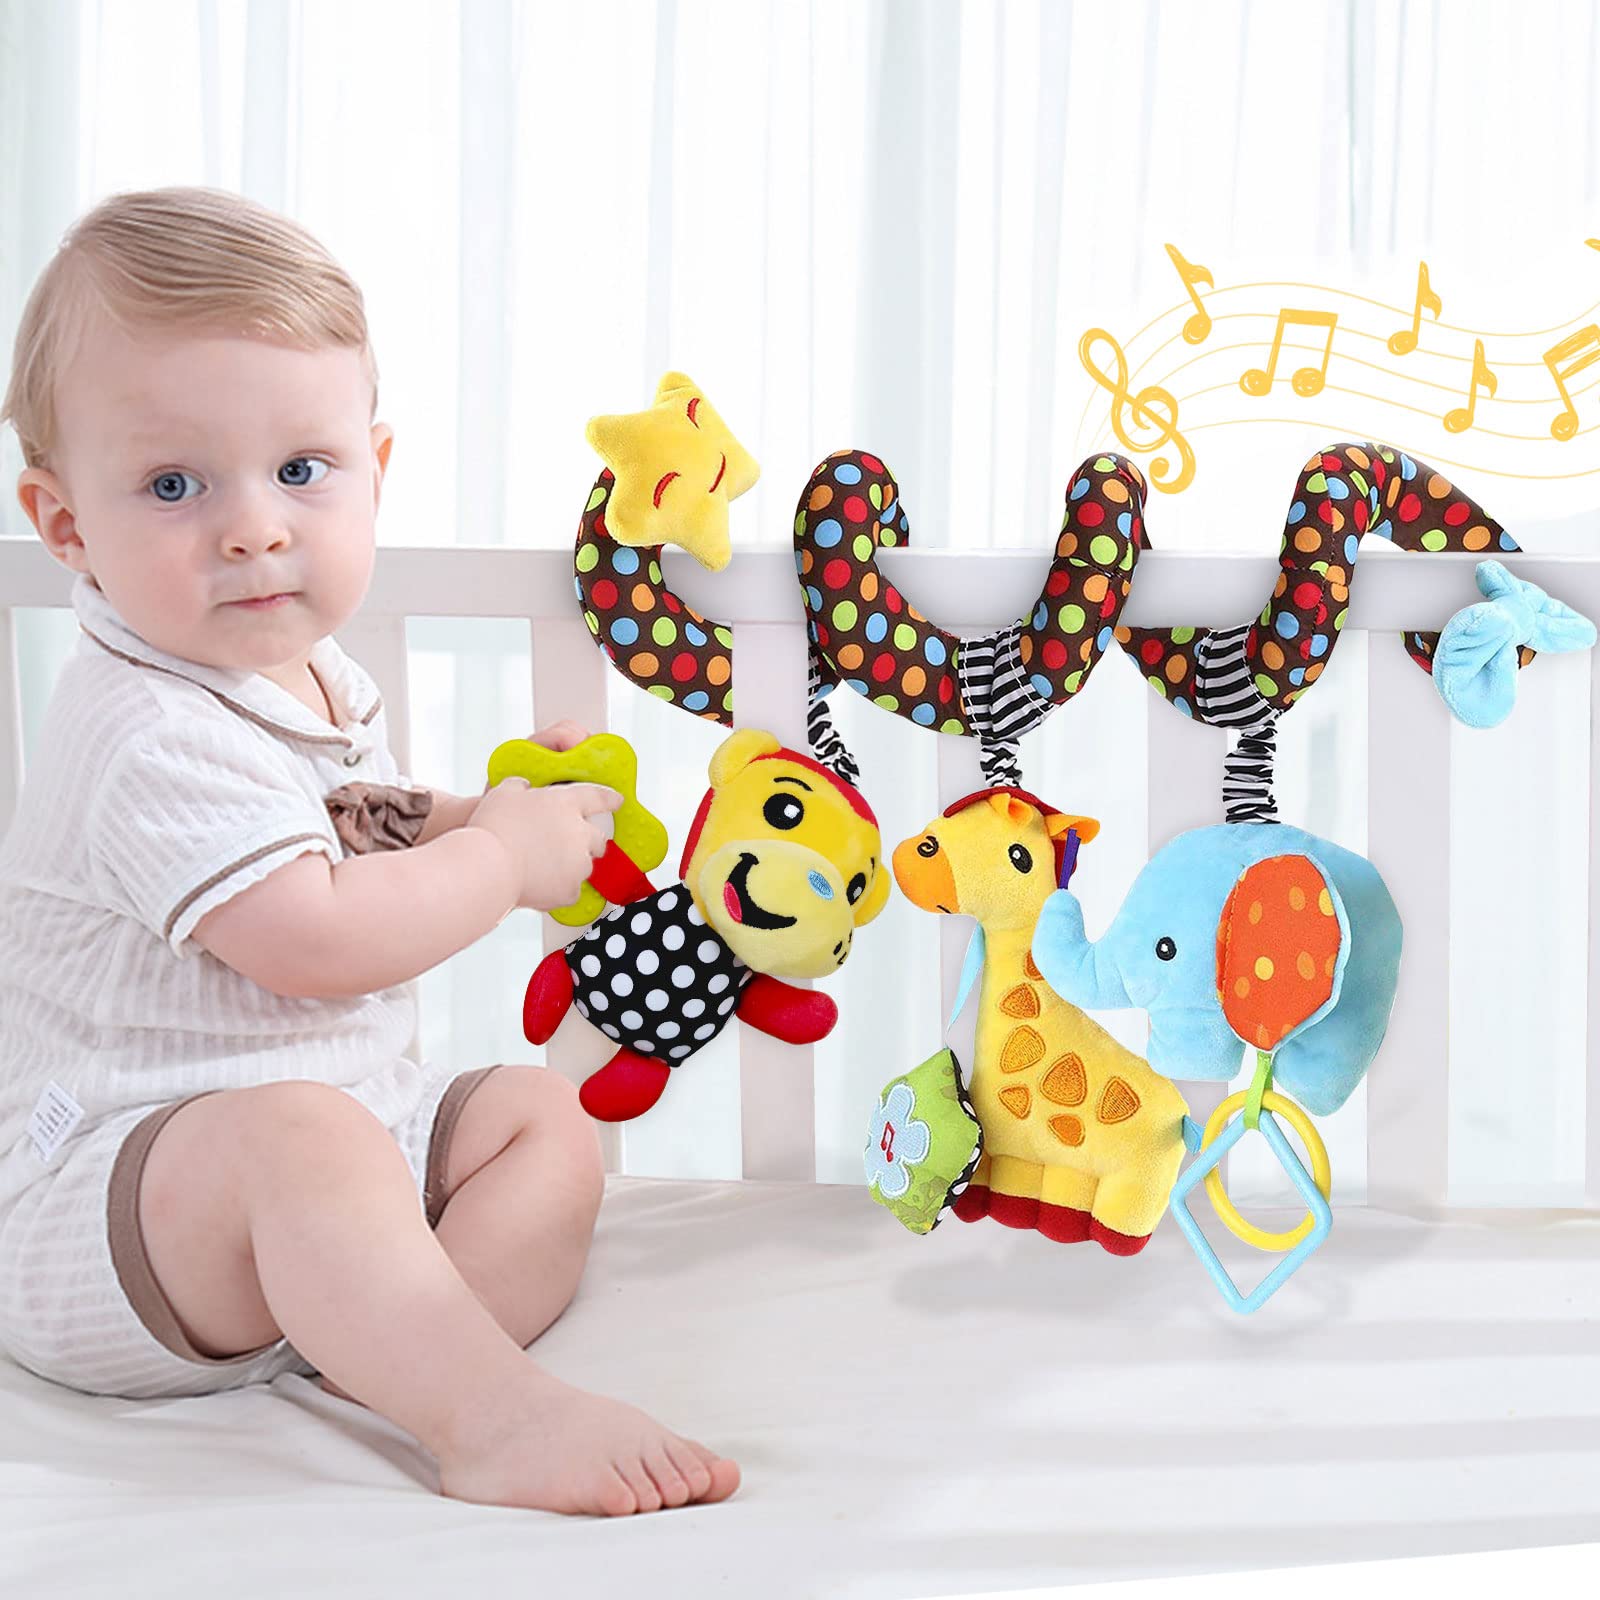 Car Seat Toys Baby Toys 0-3 Months Infant Toys, Newborn Toys Baby Spiral Stroller Toys, Baby Toys 0-6 Months for Crib Mobile Bassinet with Music Rattles Teether for 0 3 6 9 12 Boys Girls (2 Velcro)